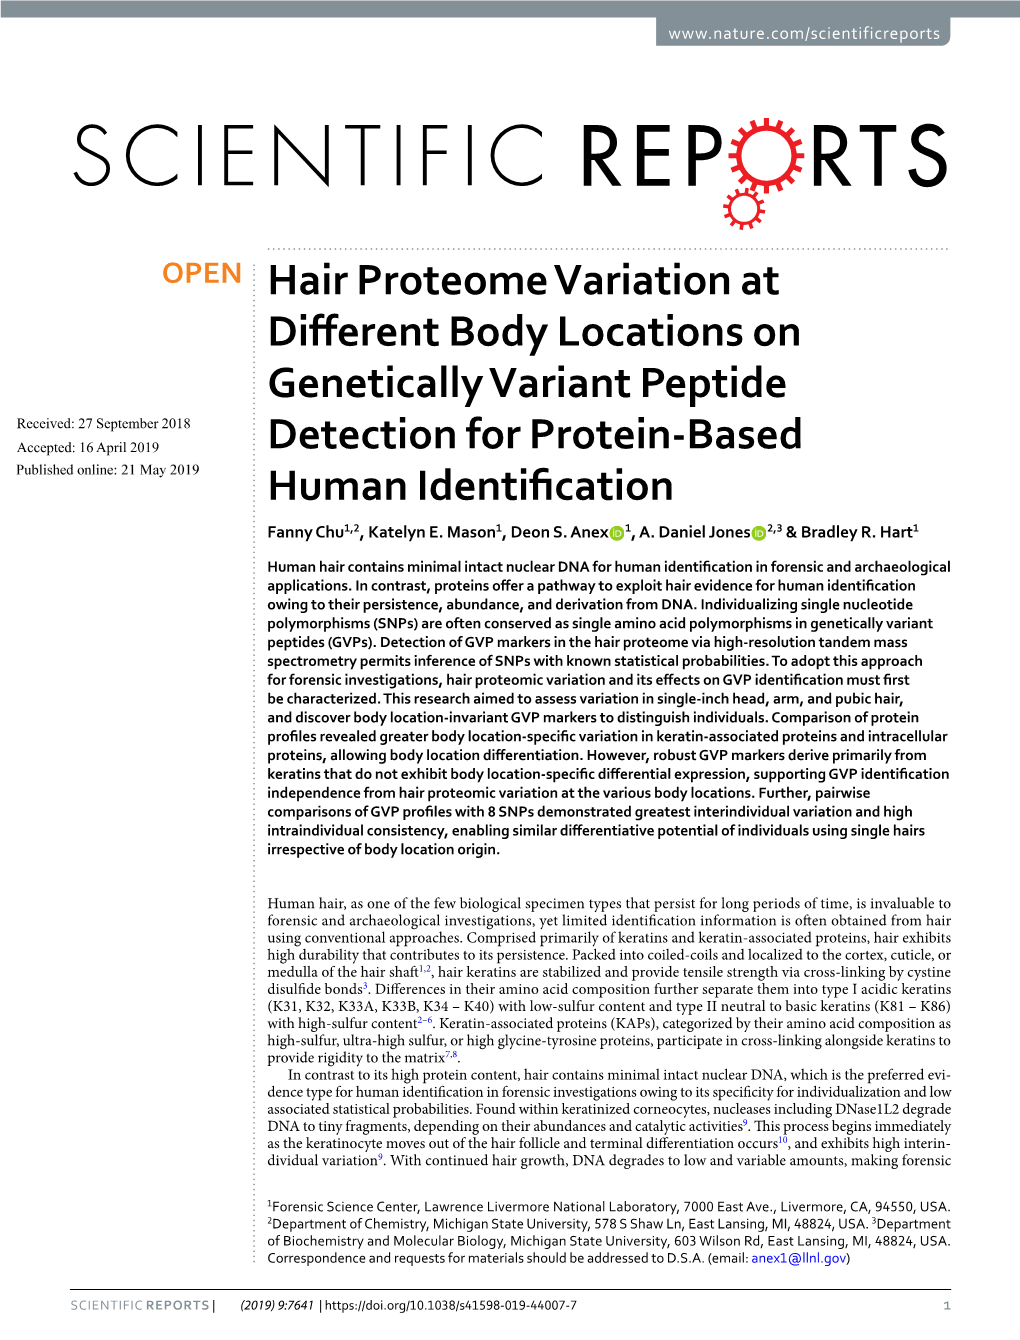 Hair Proteome Variation at Different Body Locations on Genetically